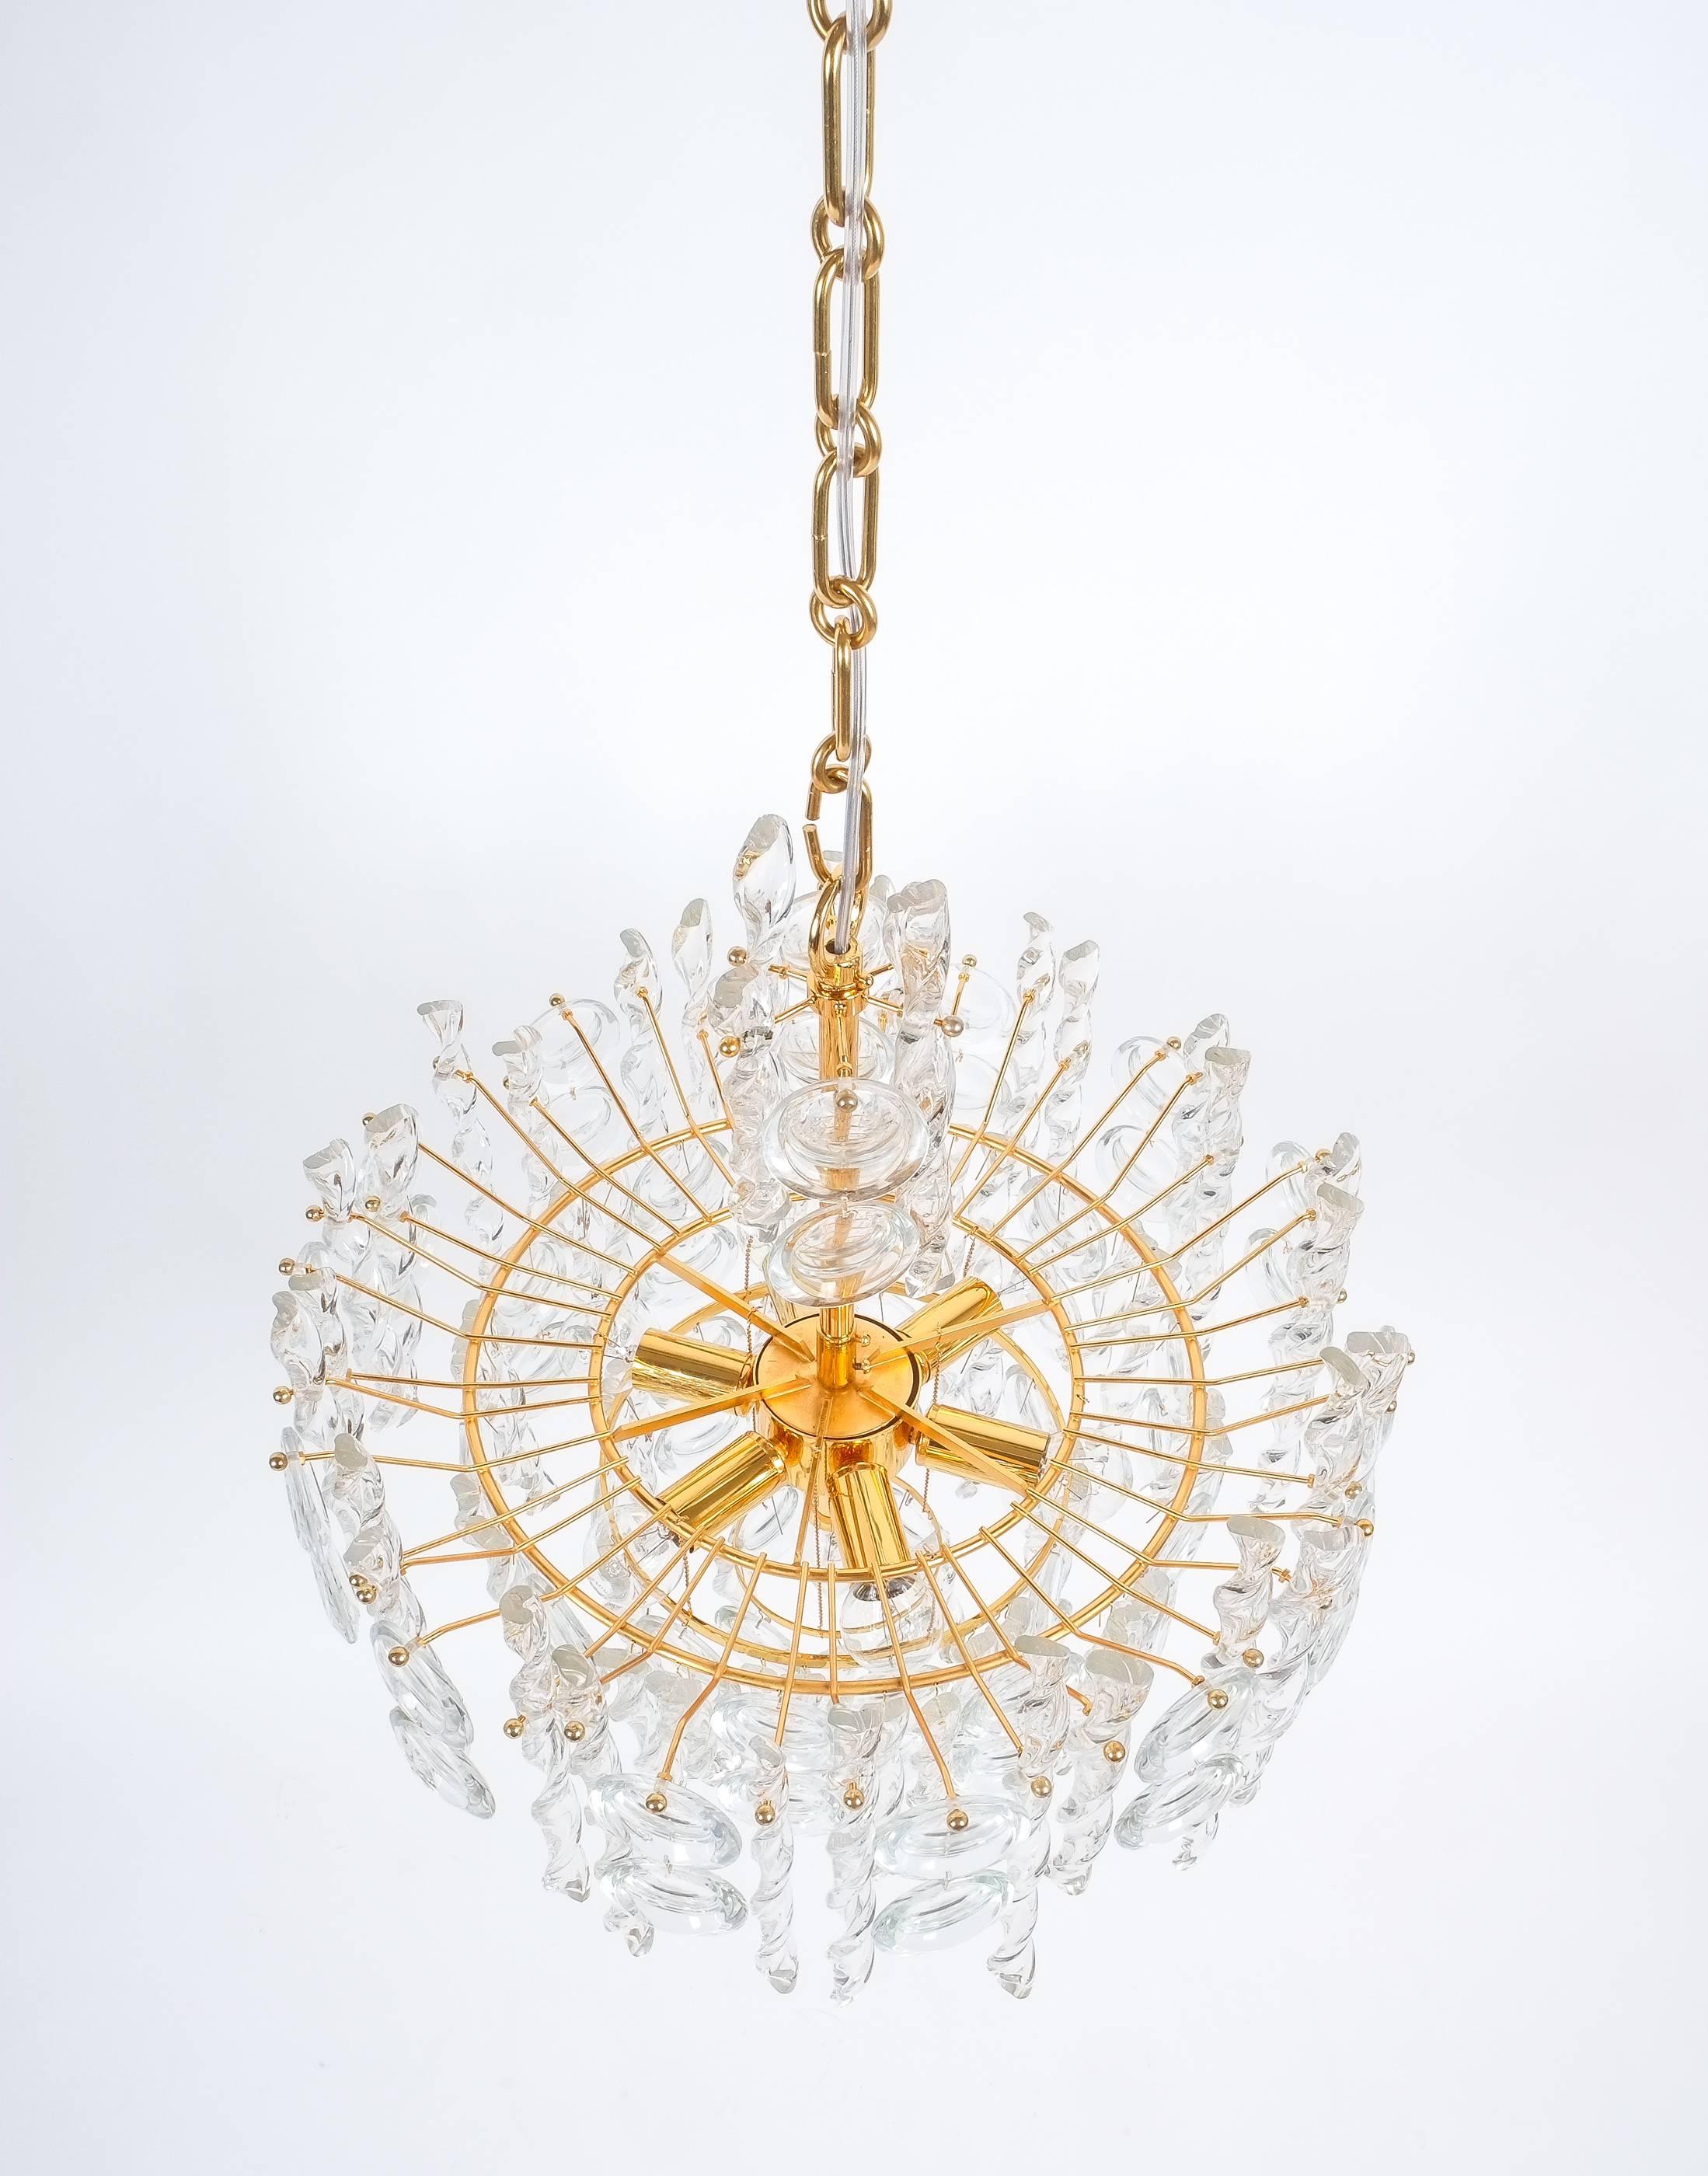 Palwa Tendril Ribbon Glass and Gold Chandelier Lamp Refurbished, 1960 In Good Condition For Sale In Vienna, AT